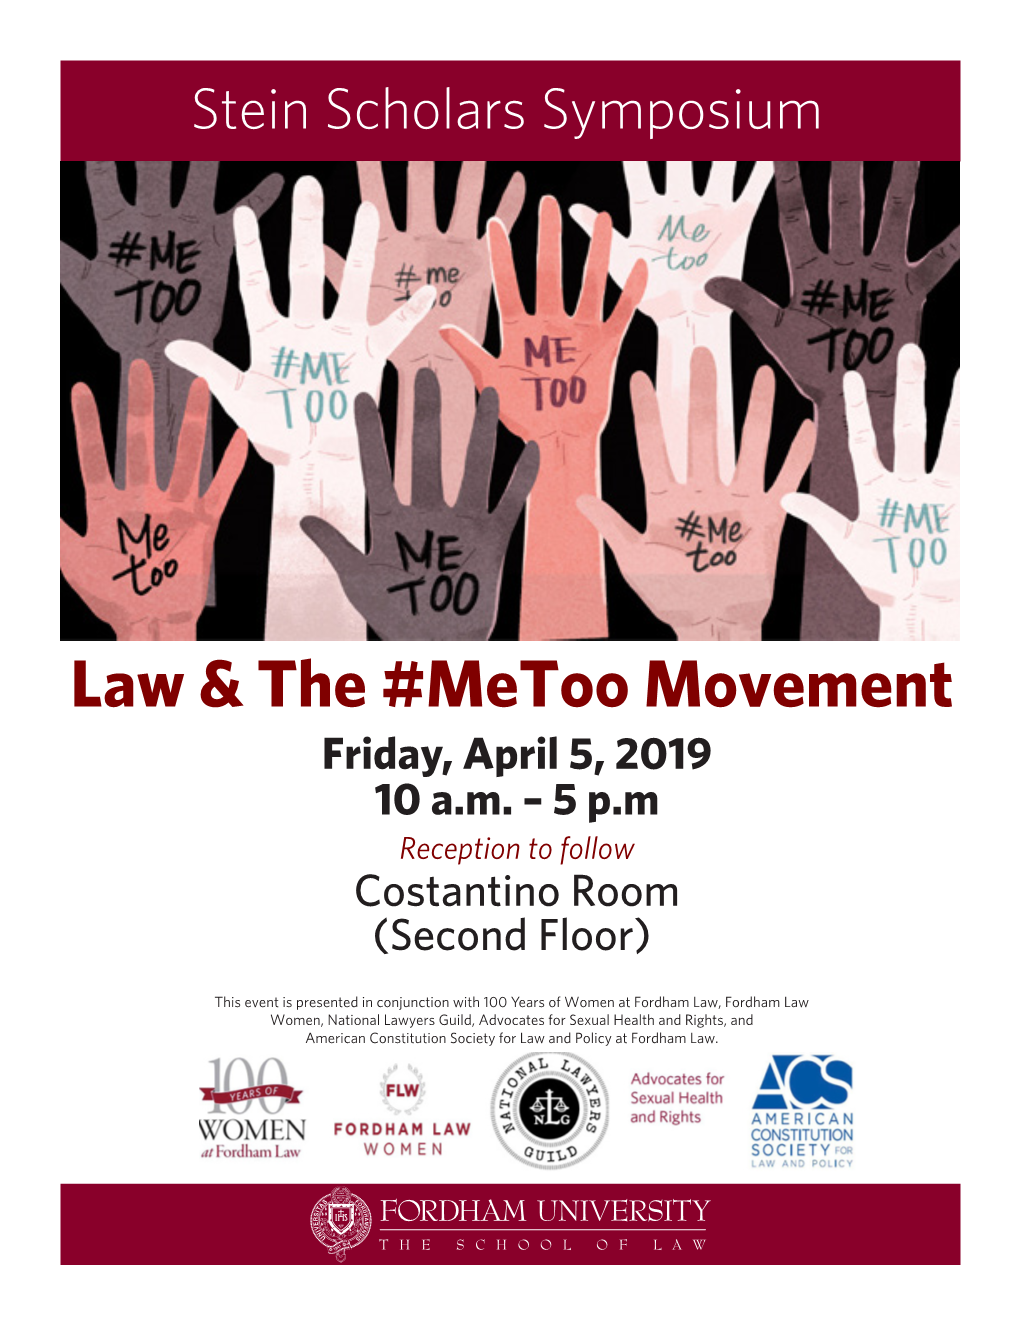 Law & the #Metoo Movement